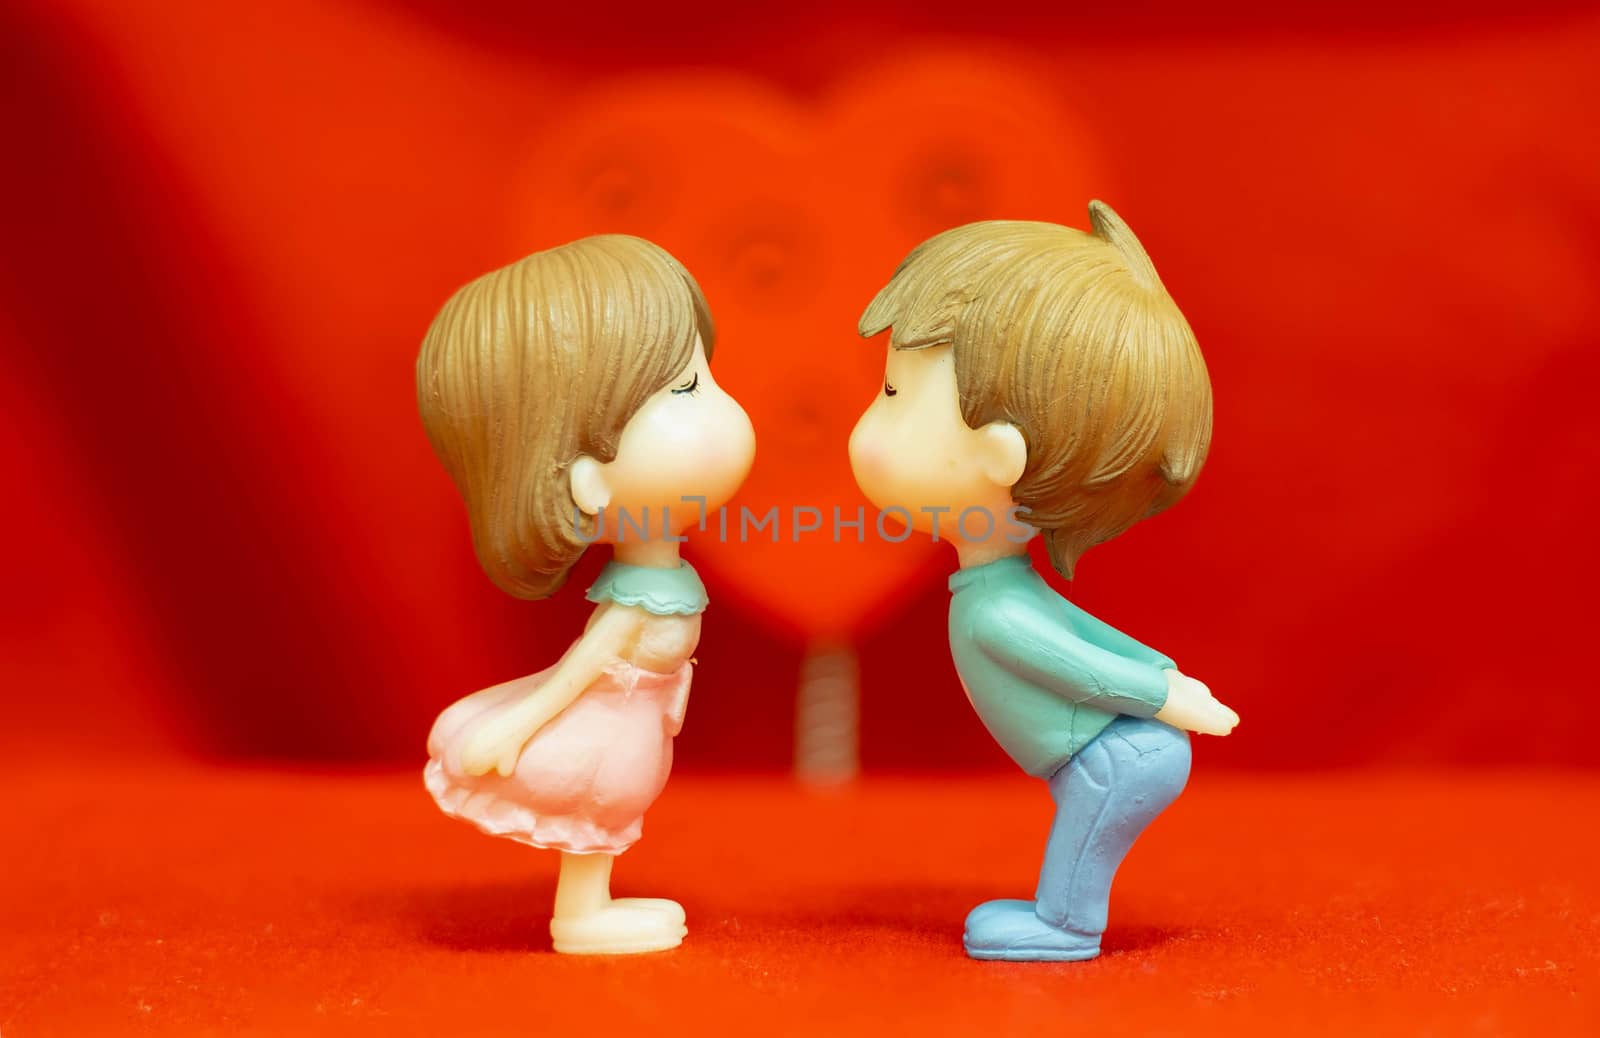 The Miniature Couple dolls Boy and Girl Romantic Kiss on Red Hea by Bonn2210